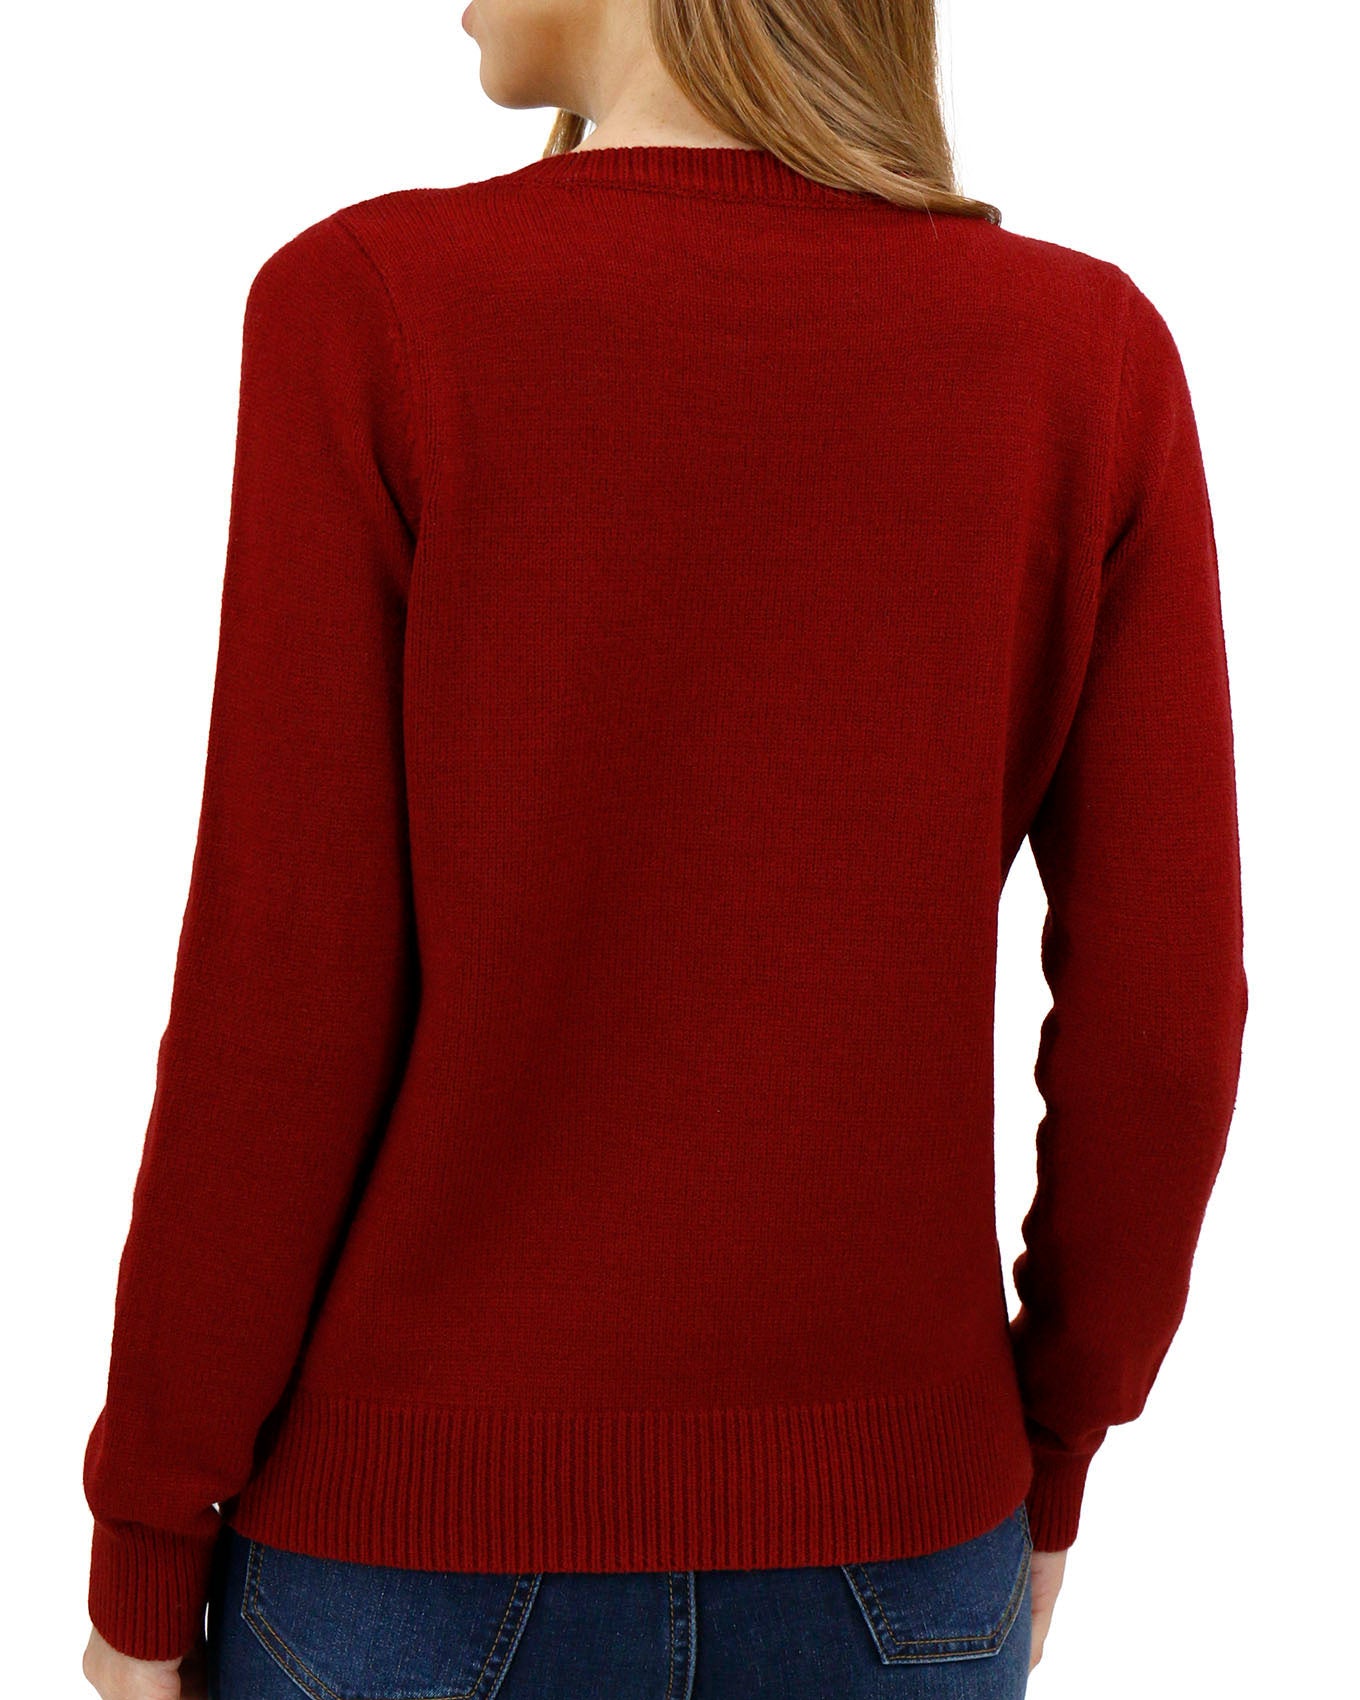 Back view stock shot of Merry Red Holiday Sweater